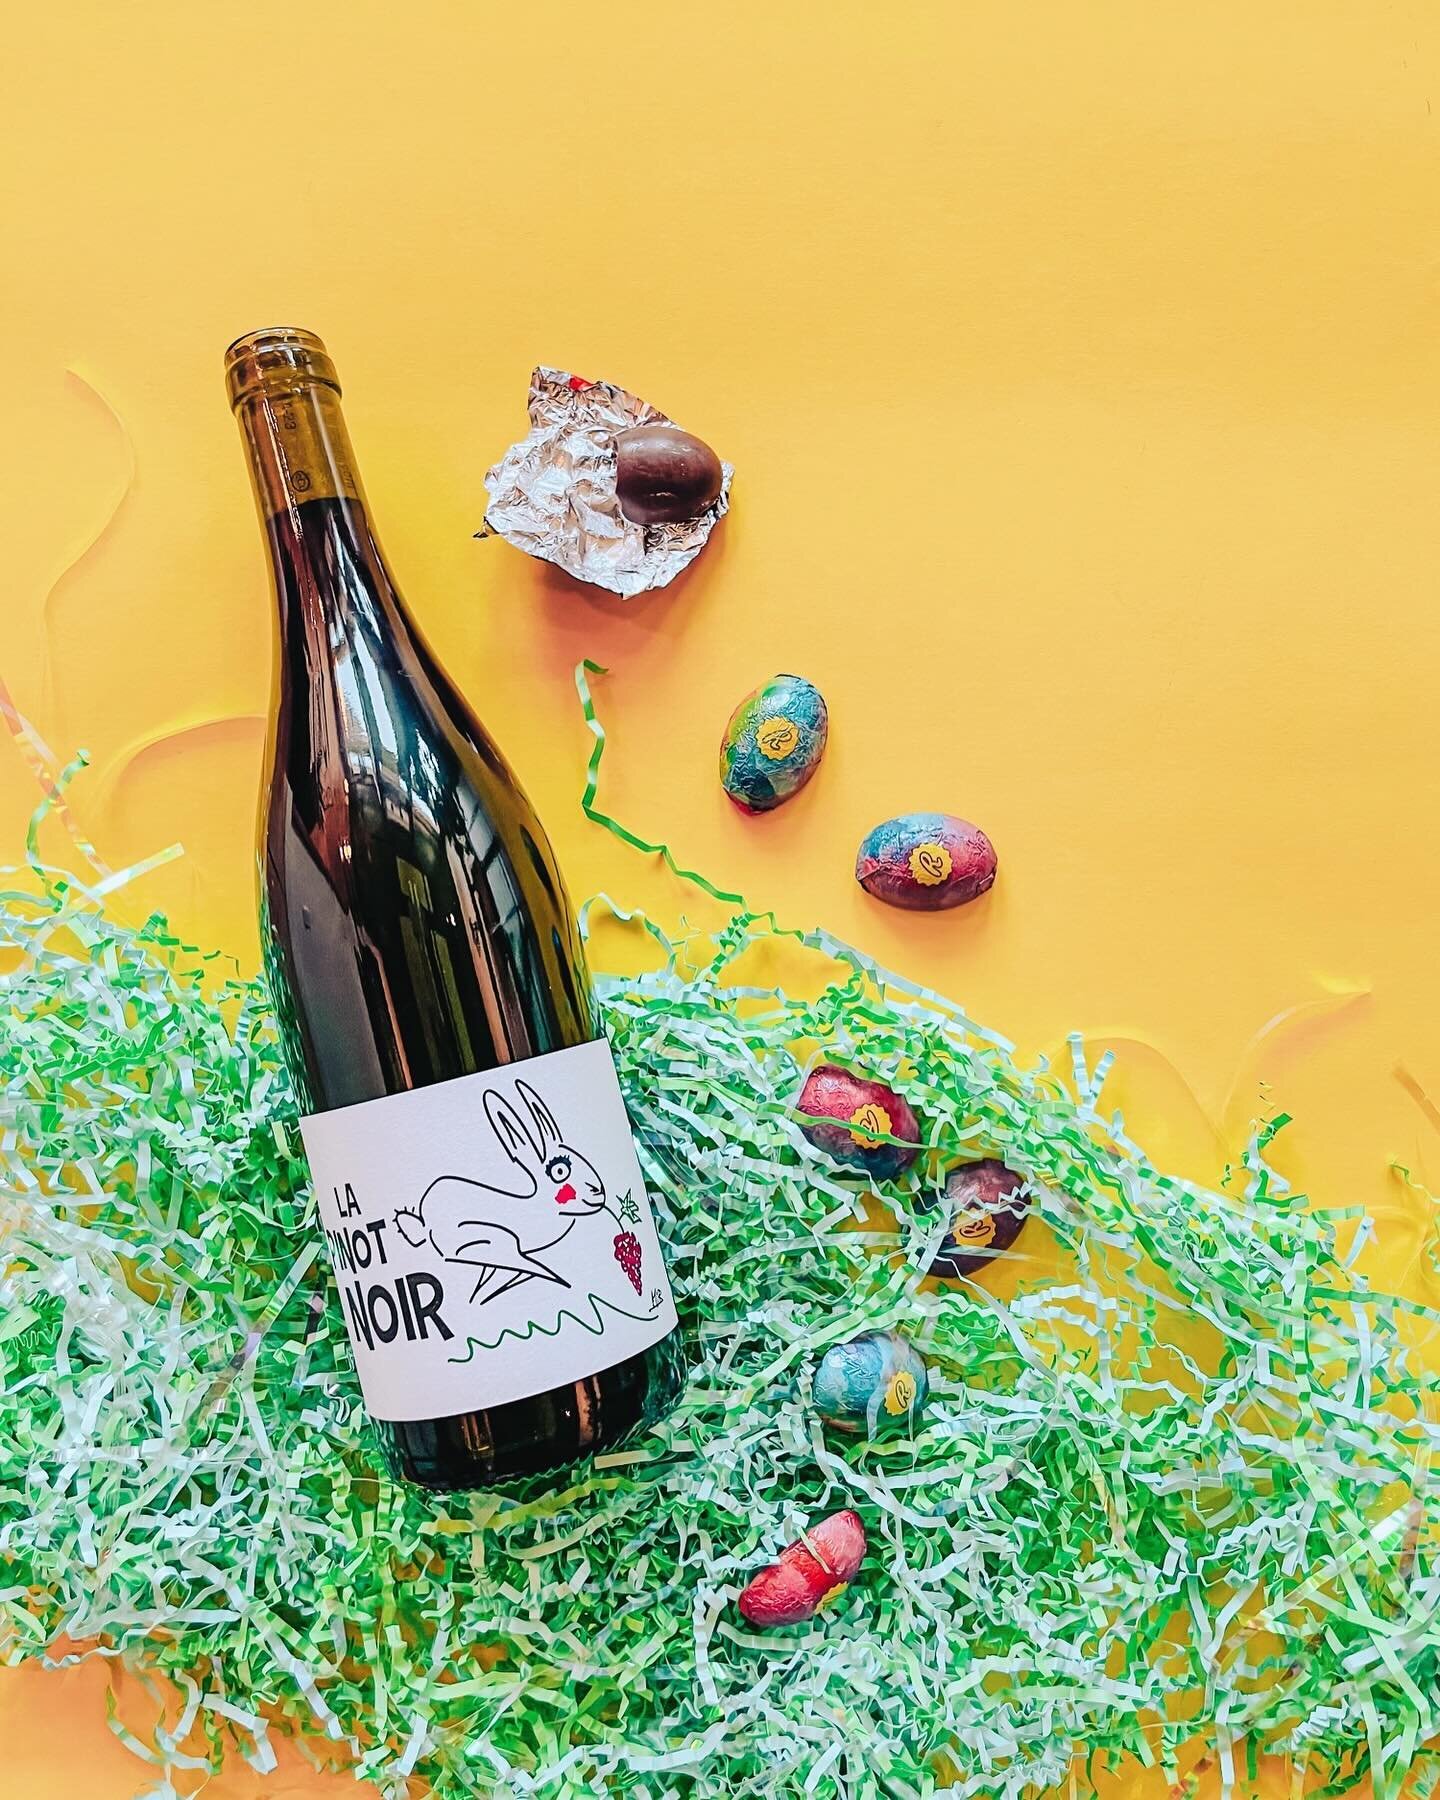 Hop on over to our corner of Oakley and stock up for your weekend! A bottle may not fit inside a plastic egg, but it sure can taste nice alongside something sweet.

Open 3-10 Thursday, 1-10 Friday + Saturday, closed March 31 🍬🍷